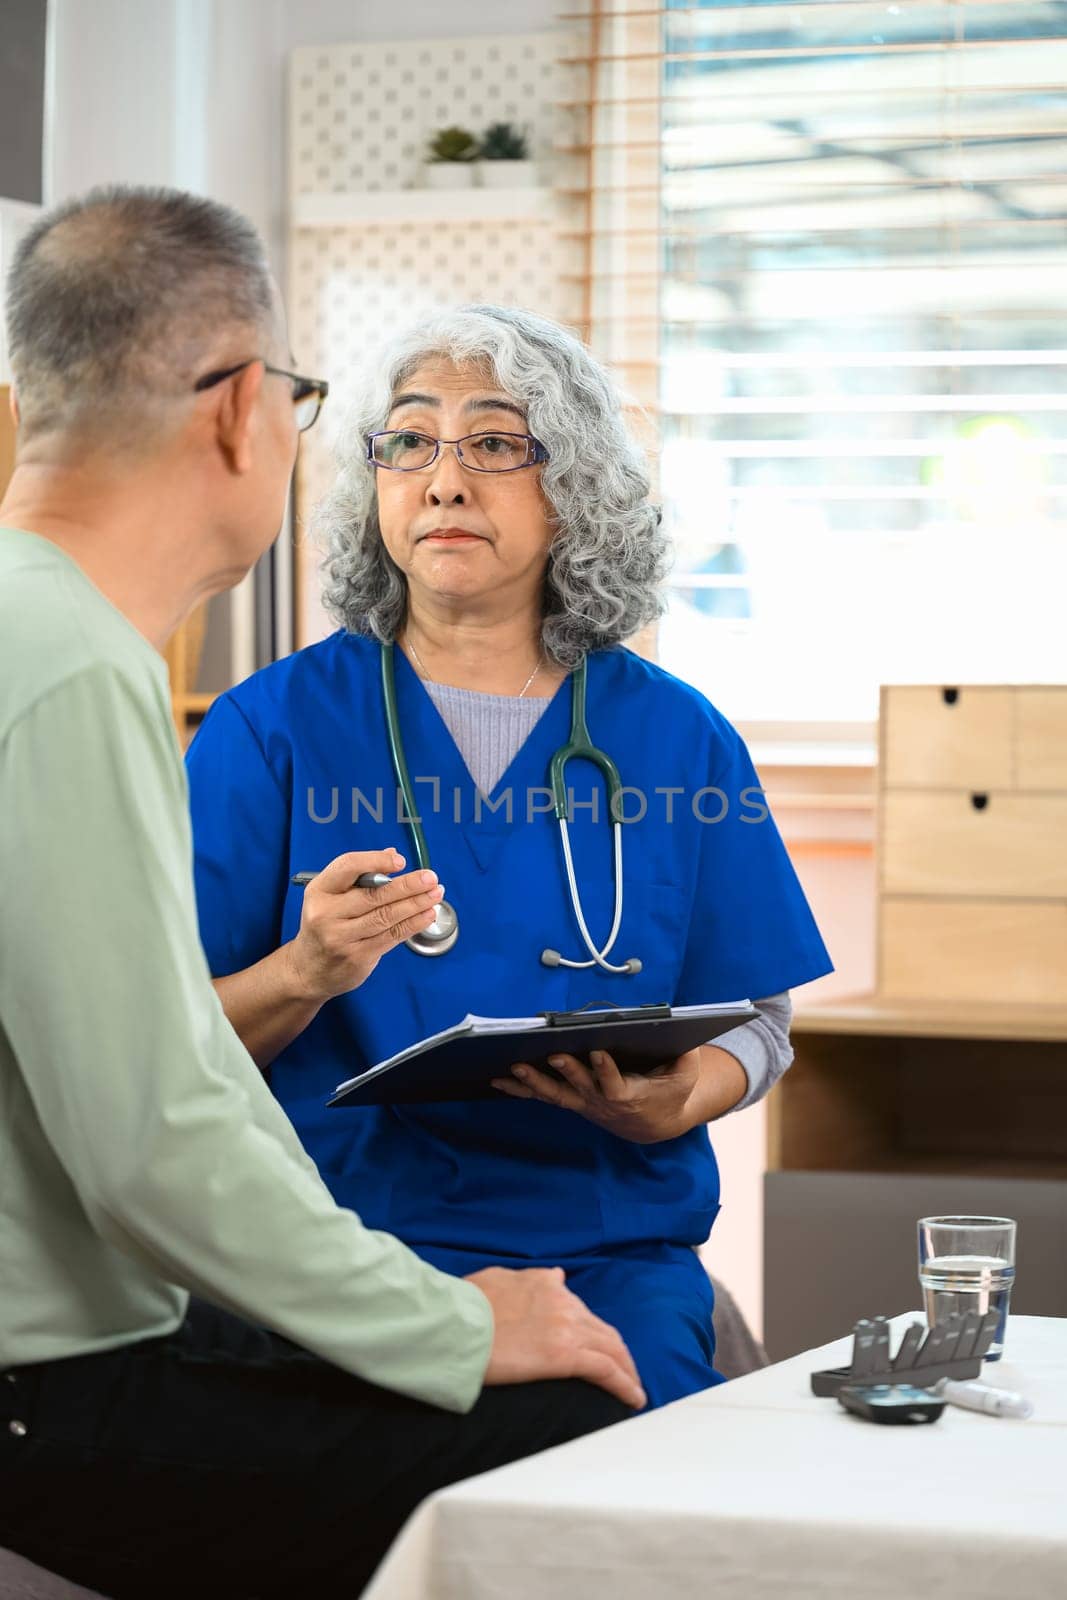 Mature healthcare worker explaining the medical results to patient during home visit.